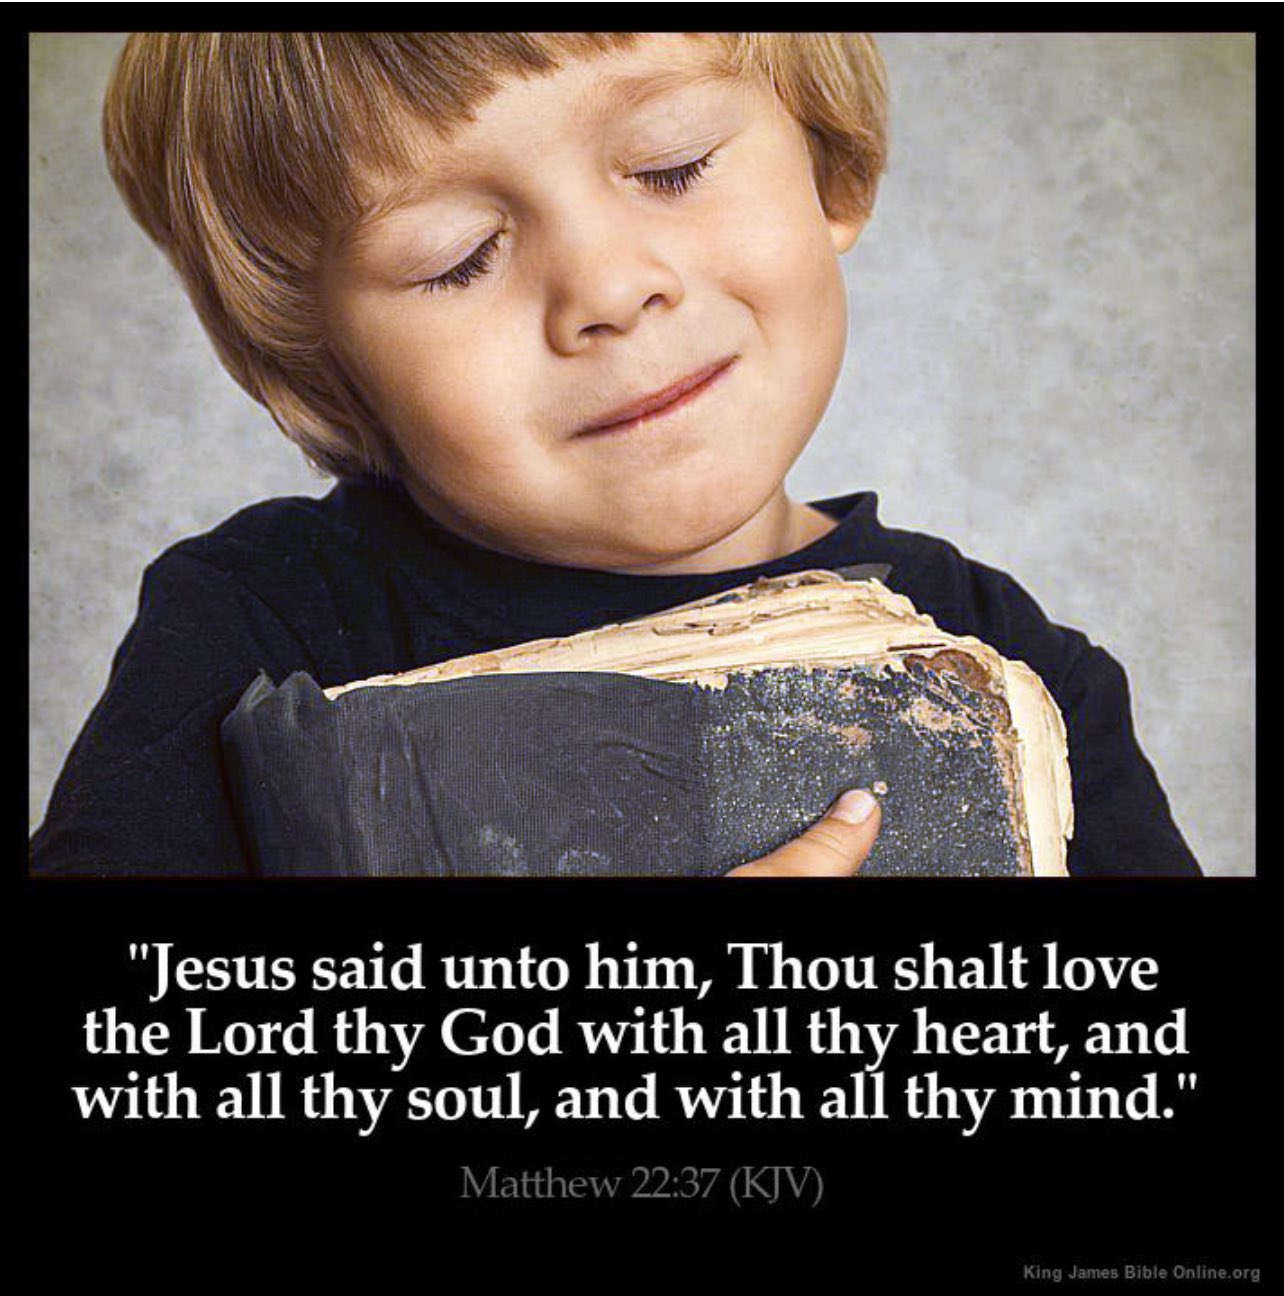 "Jesus said unto him, Thou shalt love the Lord thy God with all thy heart,and with all thy soul, and with all thy mind: Matthew 22.37 (KJV)